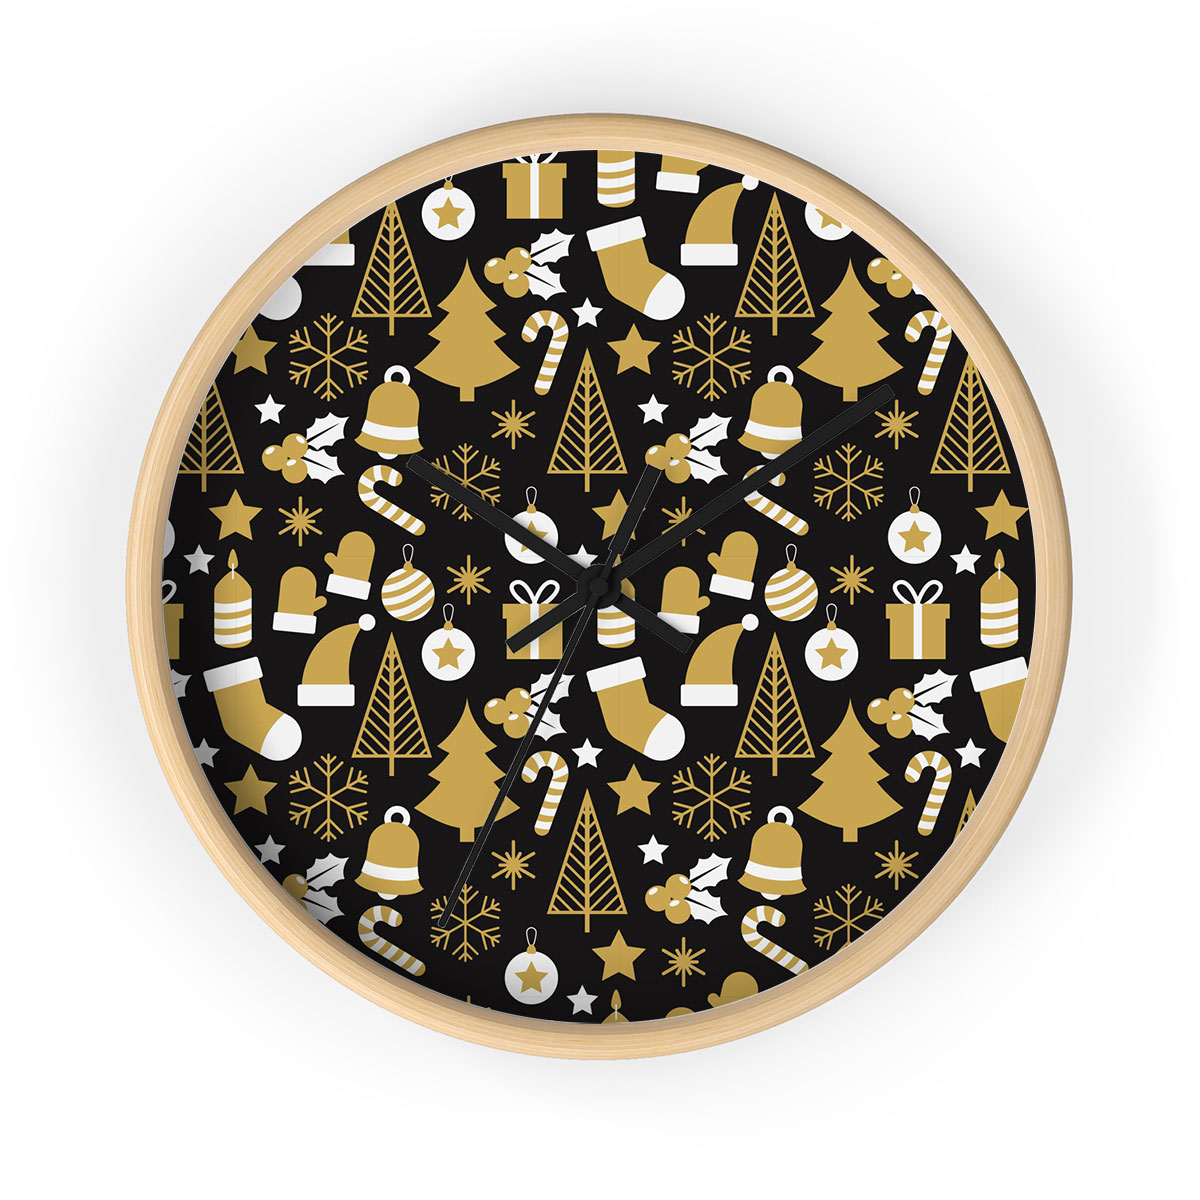 White And Gold Christmas Socks, Christmas Tree, Candy Cane On Black Background Printed Wooden Wall Clock